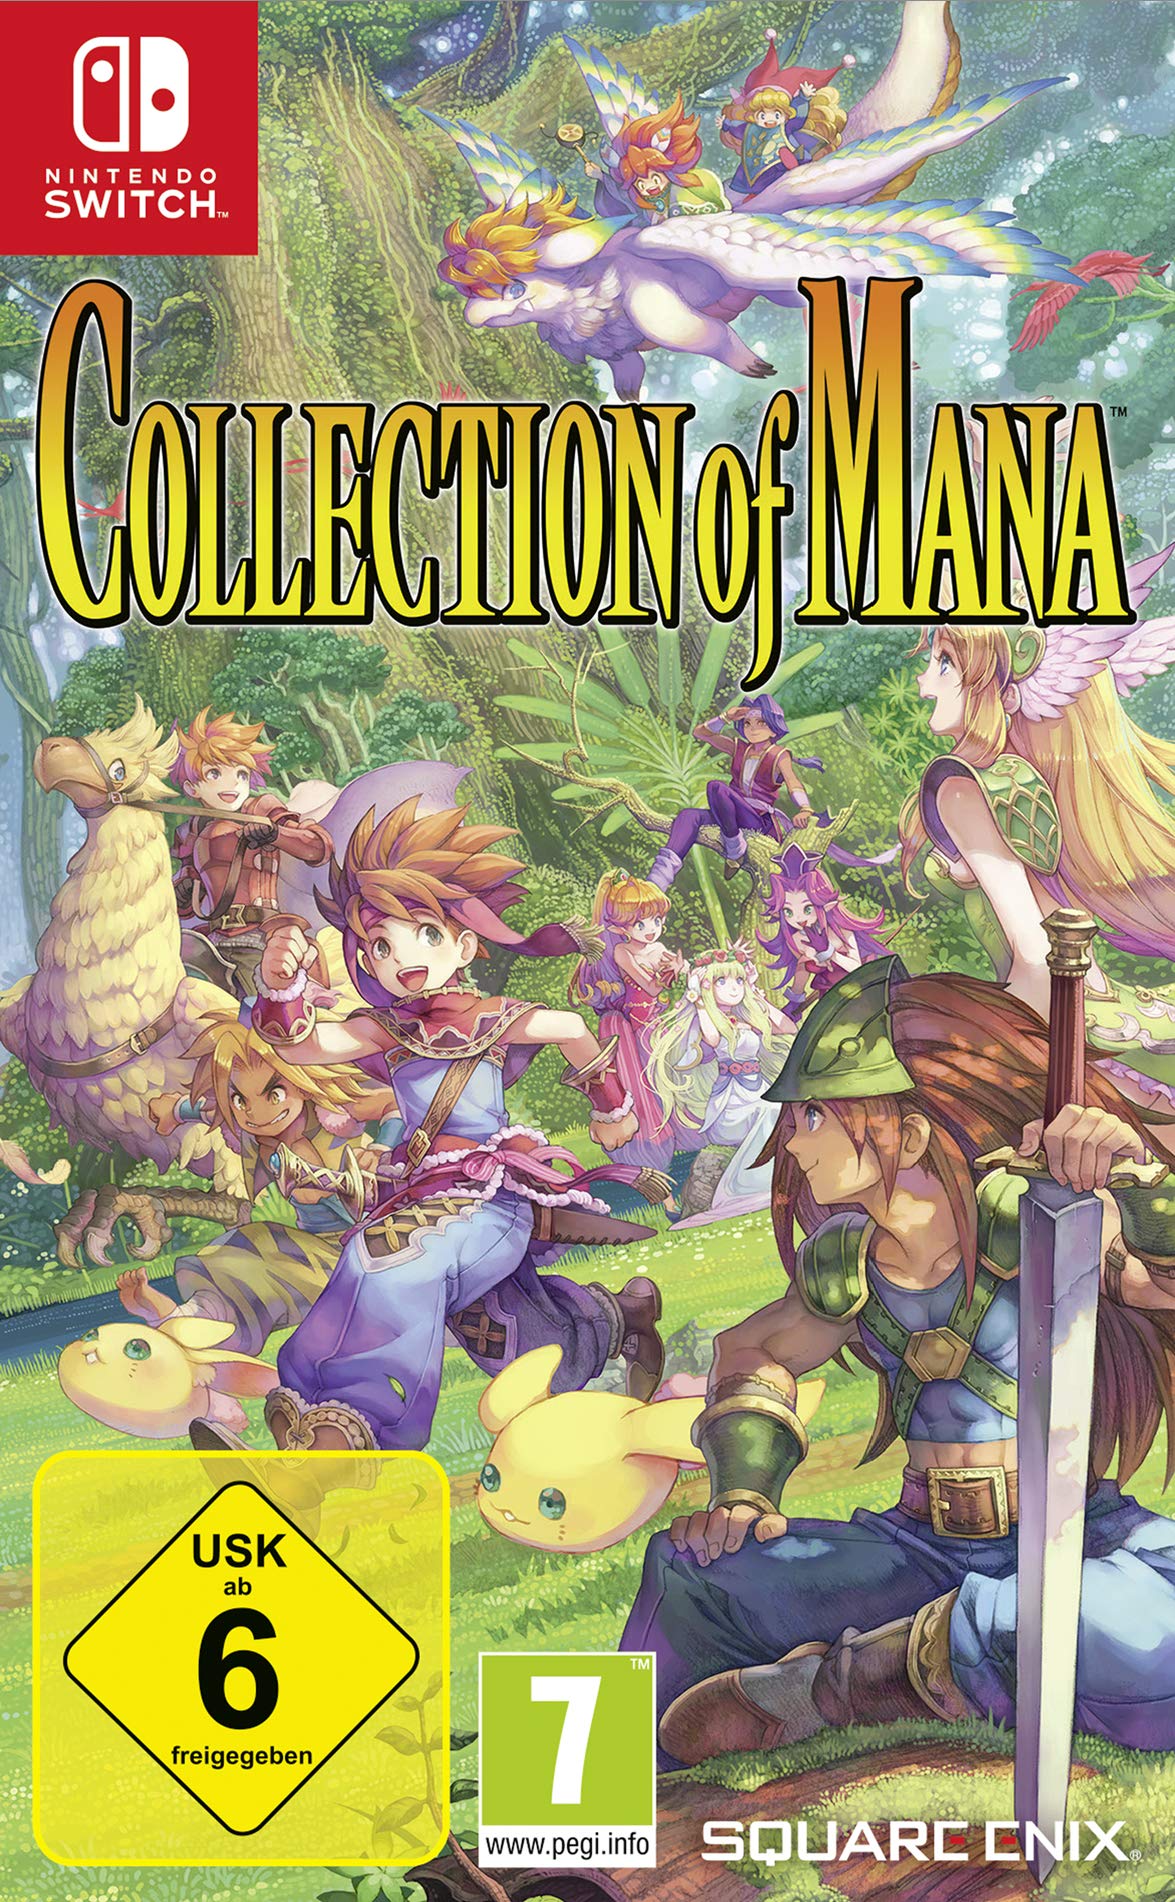 Collection-of-Mana-Switch